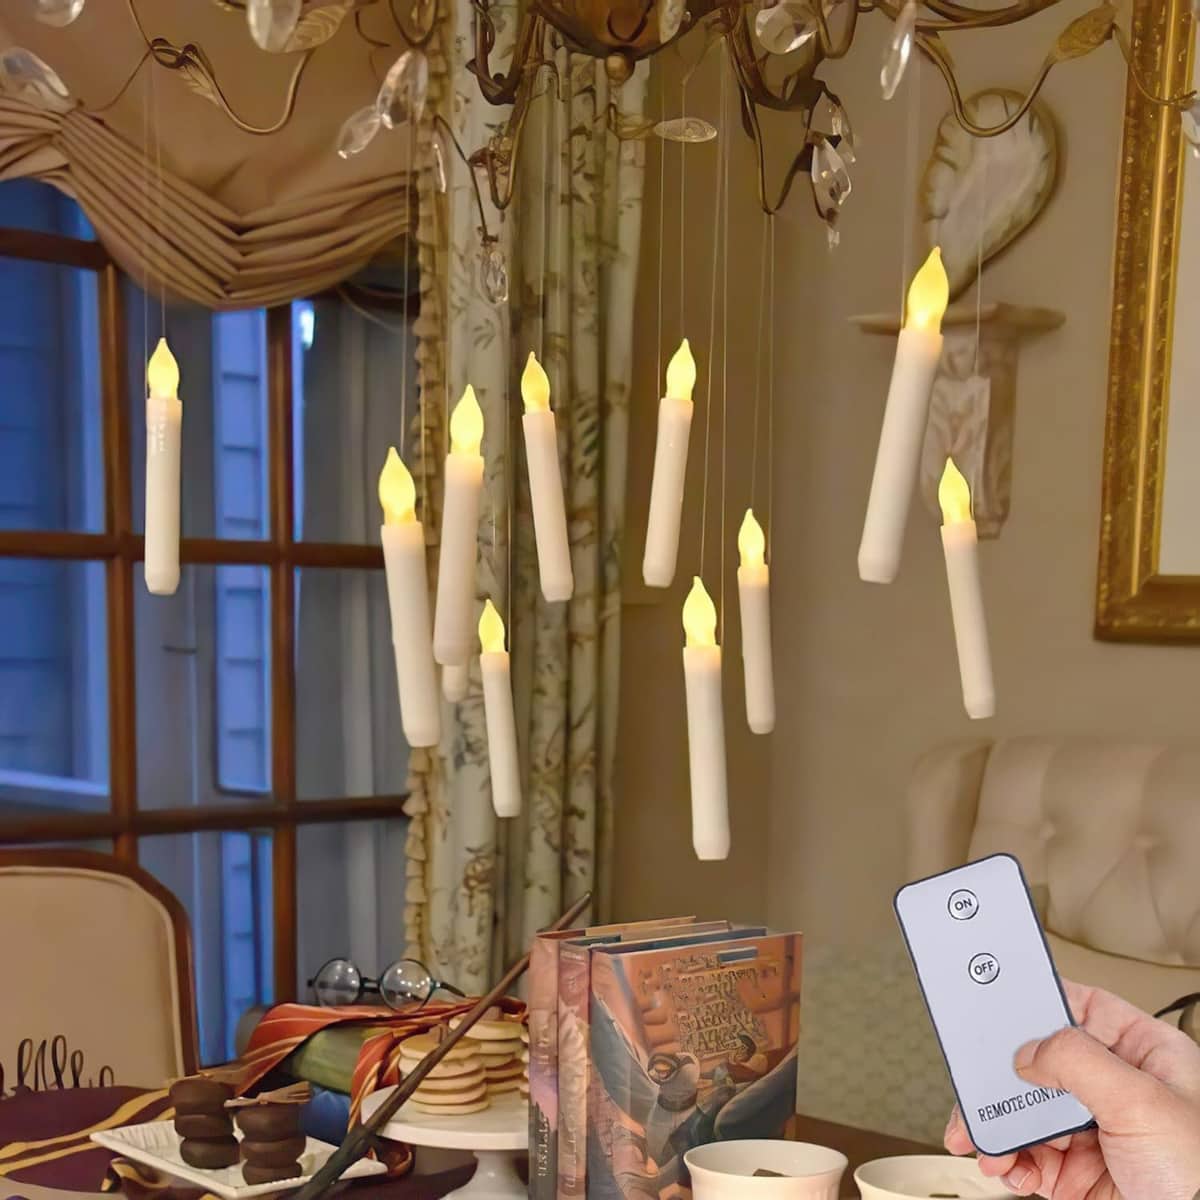 Floating candles over a dining room table.